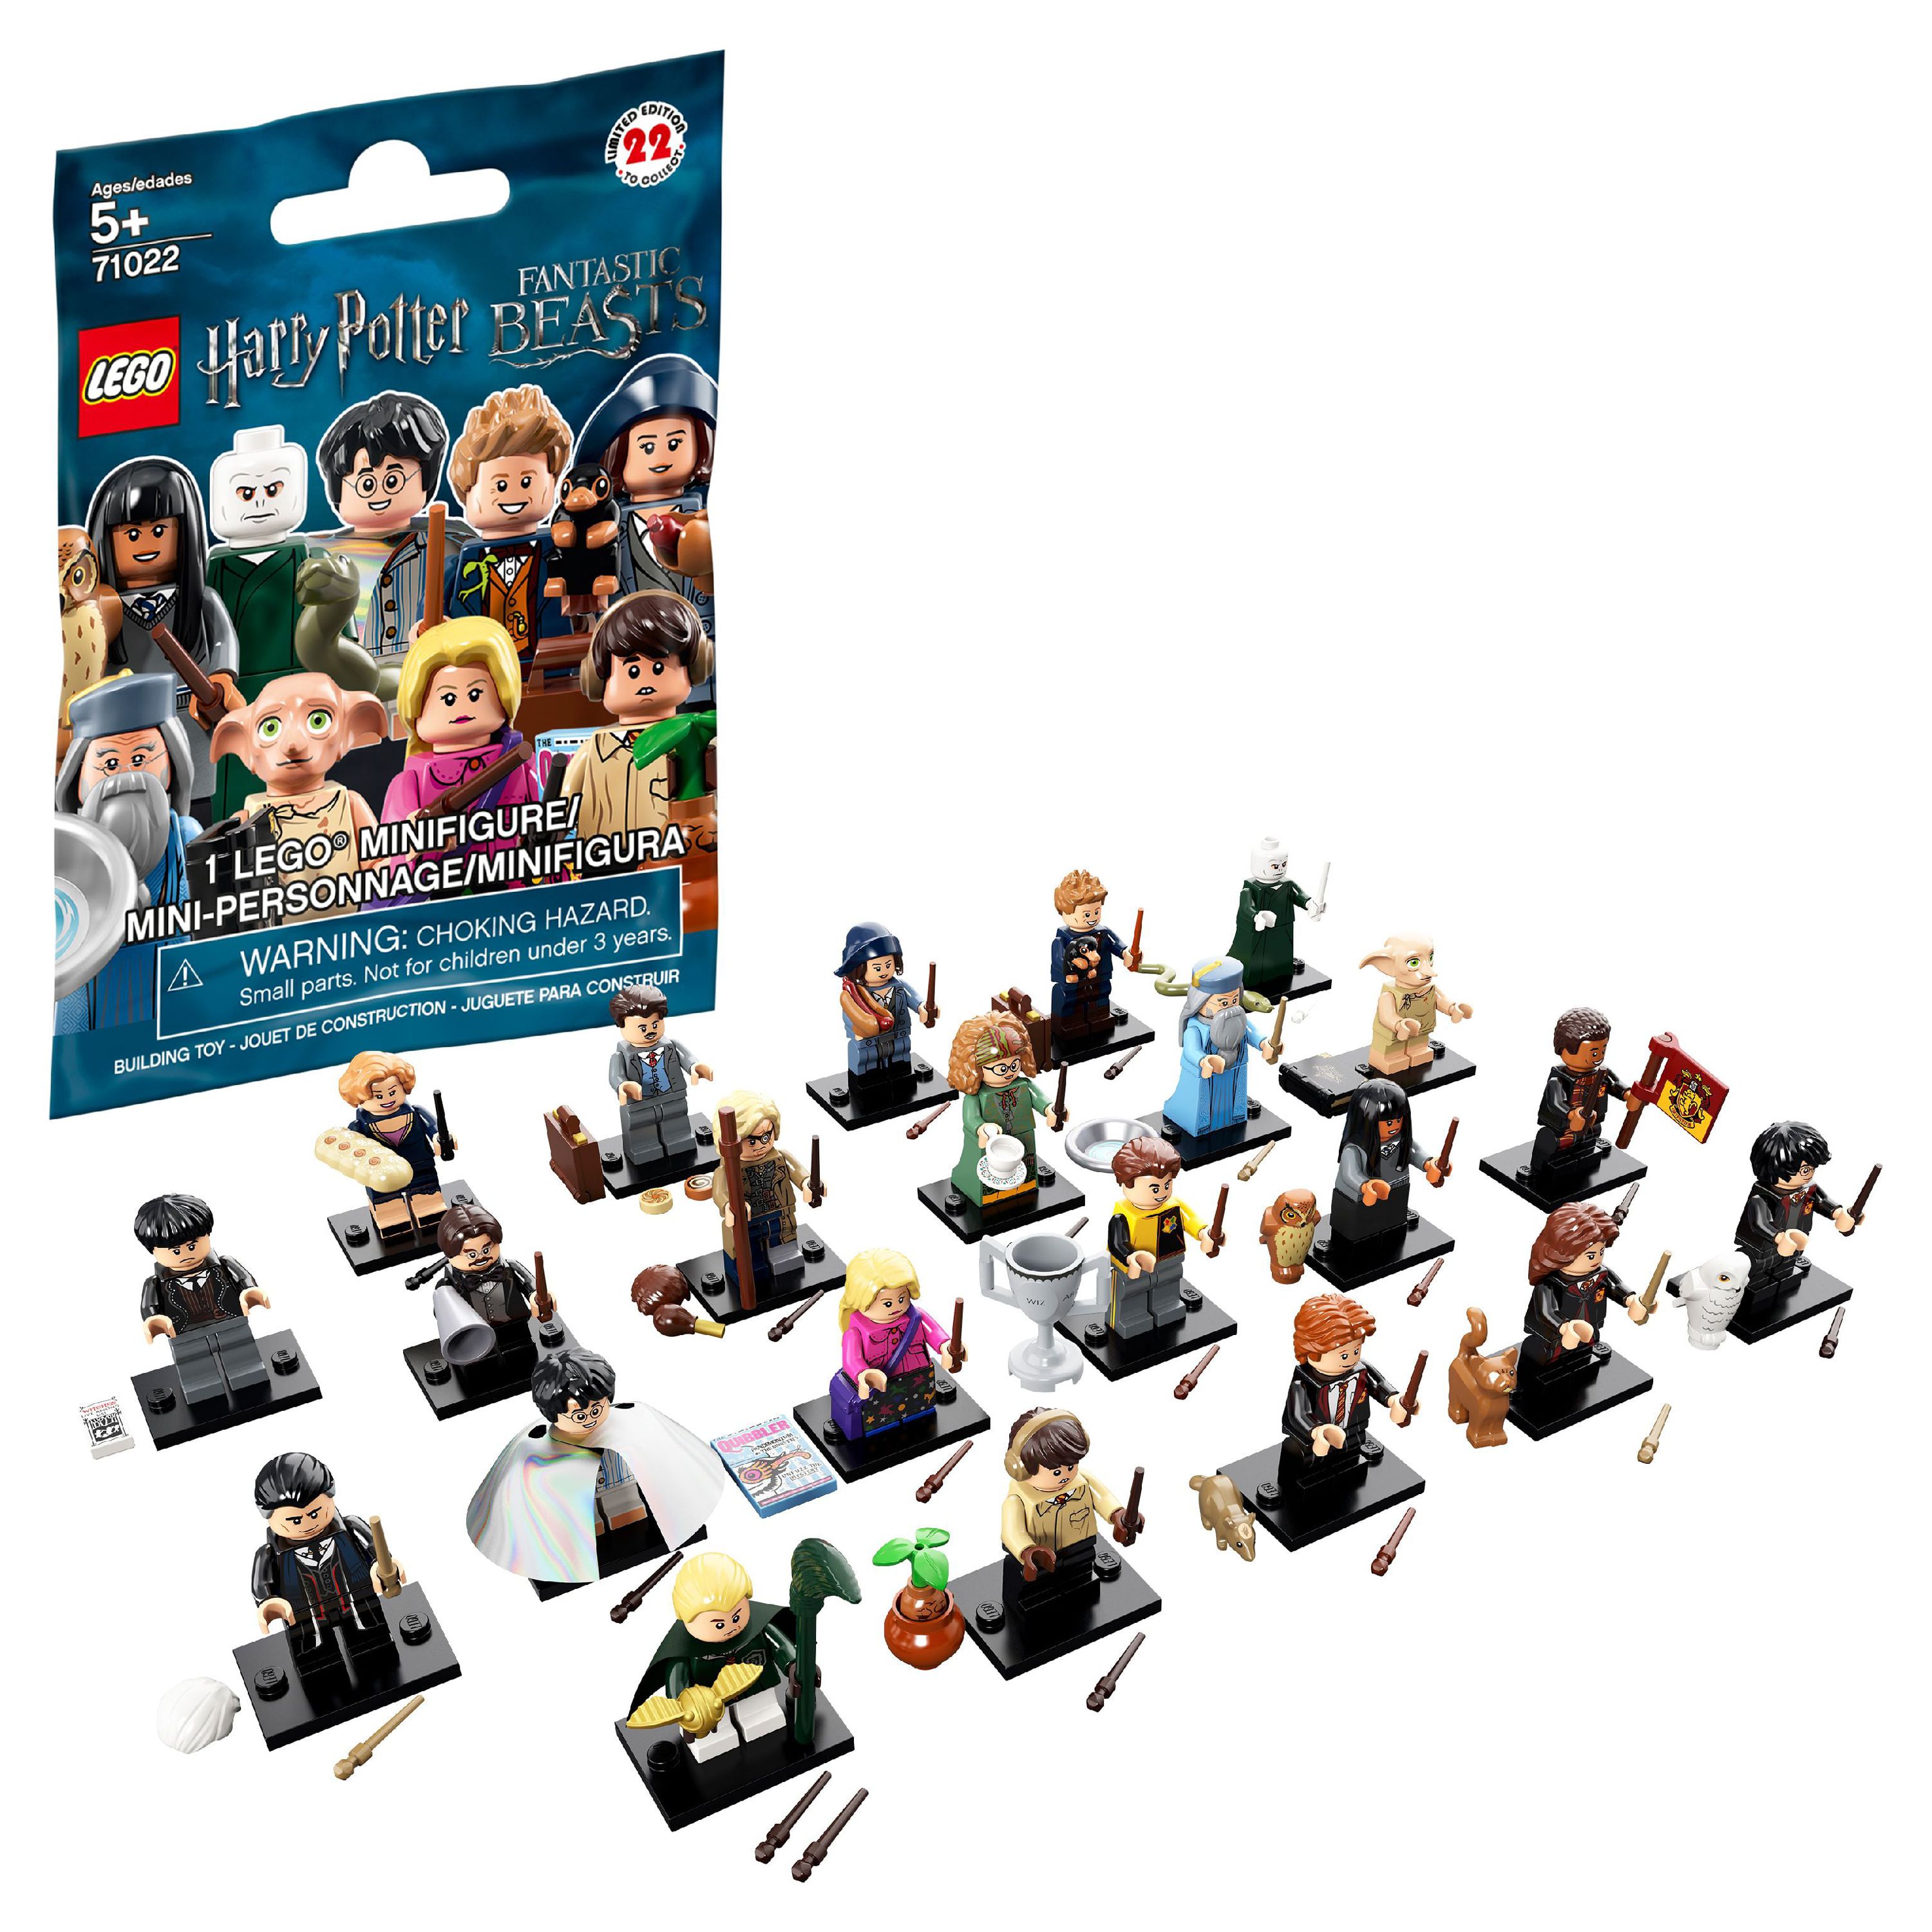 LEGO Minifigures Harry Potter and Fantastic Beasts 71022 Toy of the Year 2019, (1 Minifigure, 8 Pieces) - image 1 of 7